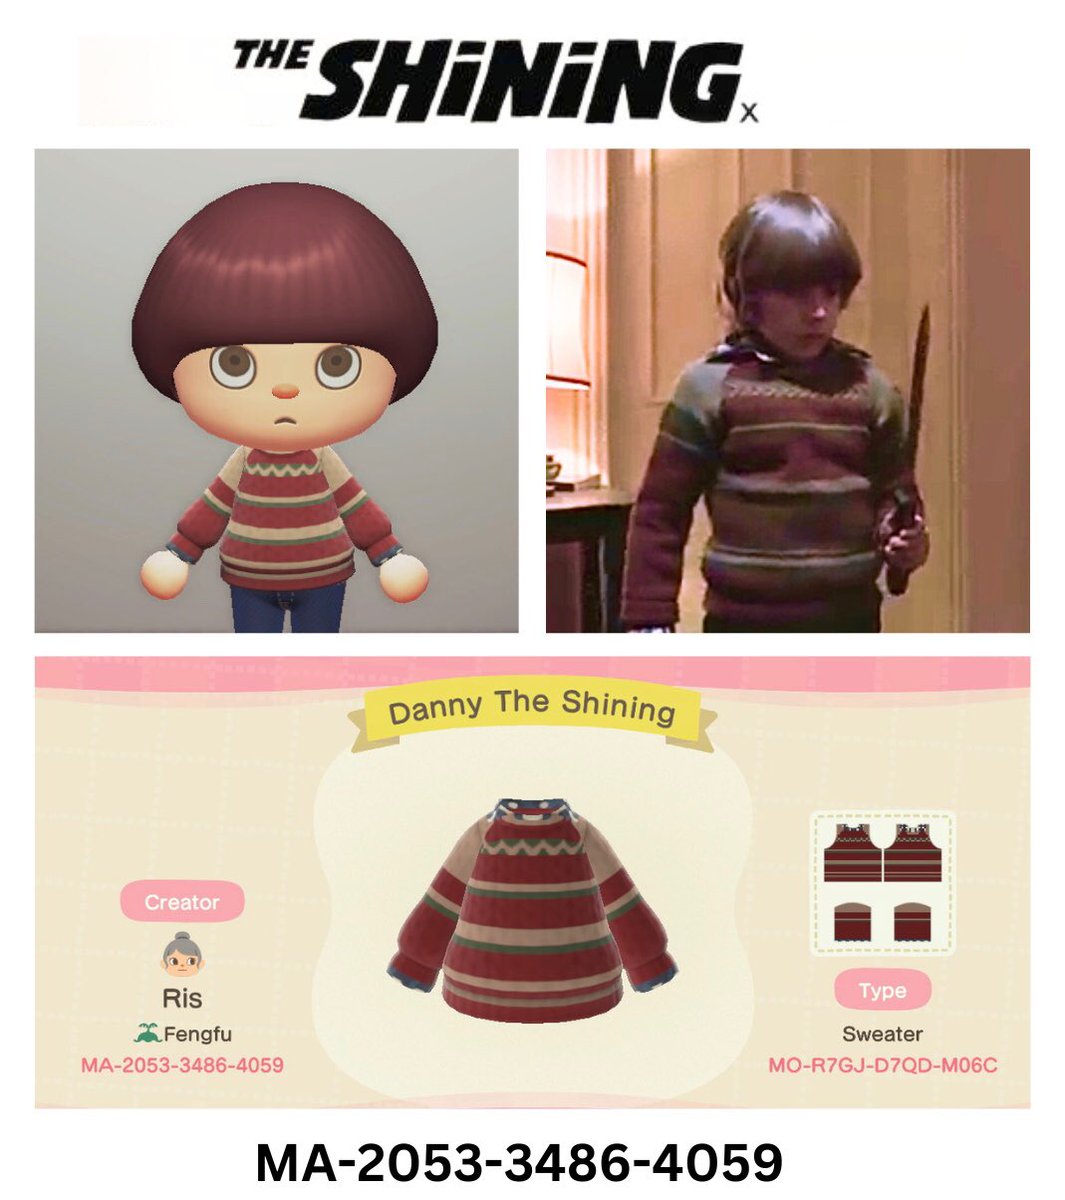 It’s okay to wear the sweater, just don’t ask about Room 237 🤫. #ACNH #AnimalCrossing #TheShining